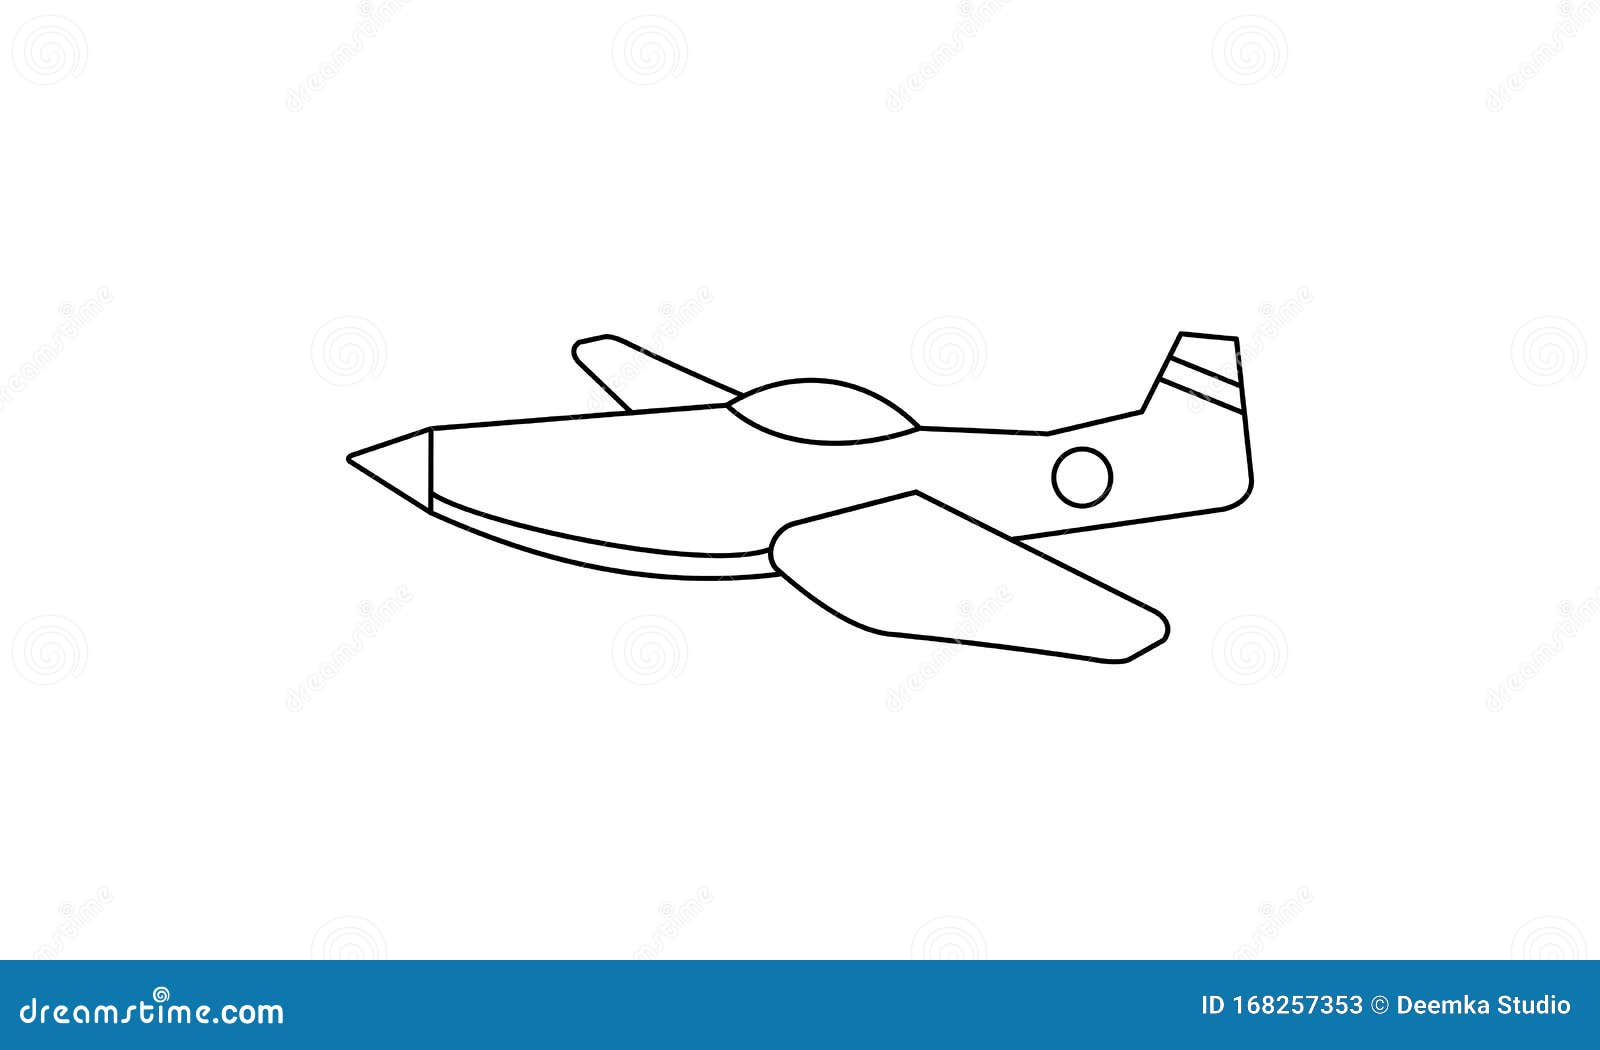 Plane Coloring Book Transportation To Educate Kids. Learn Colors ...